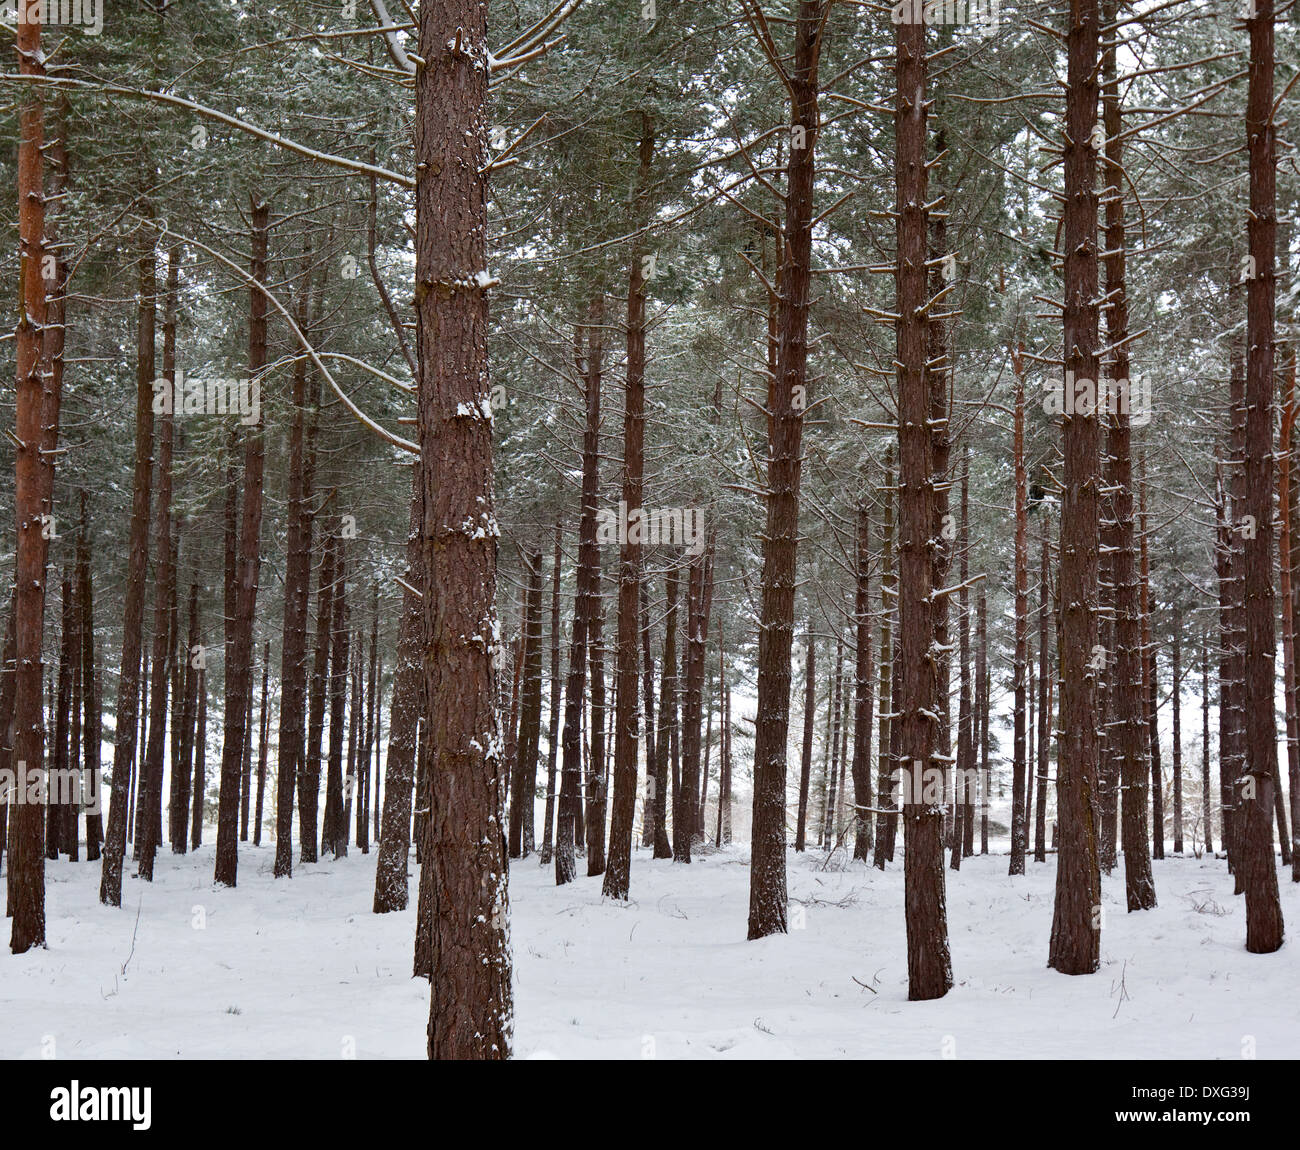 A plantation of pine trees in winter snow. Stock Photo